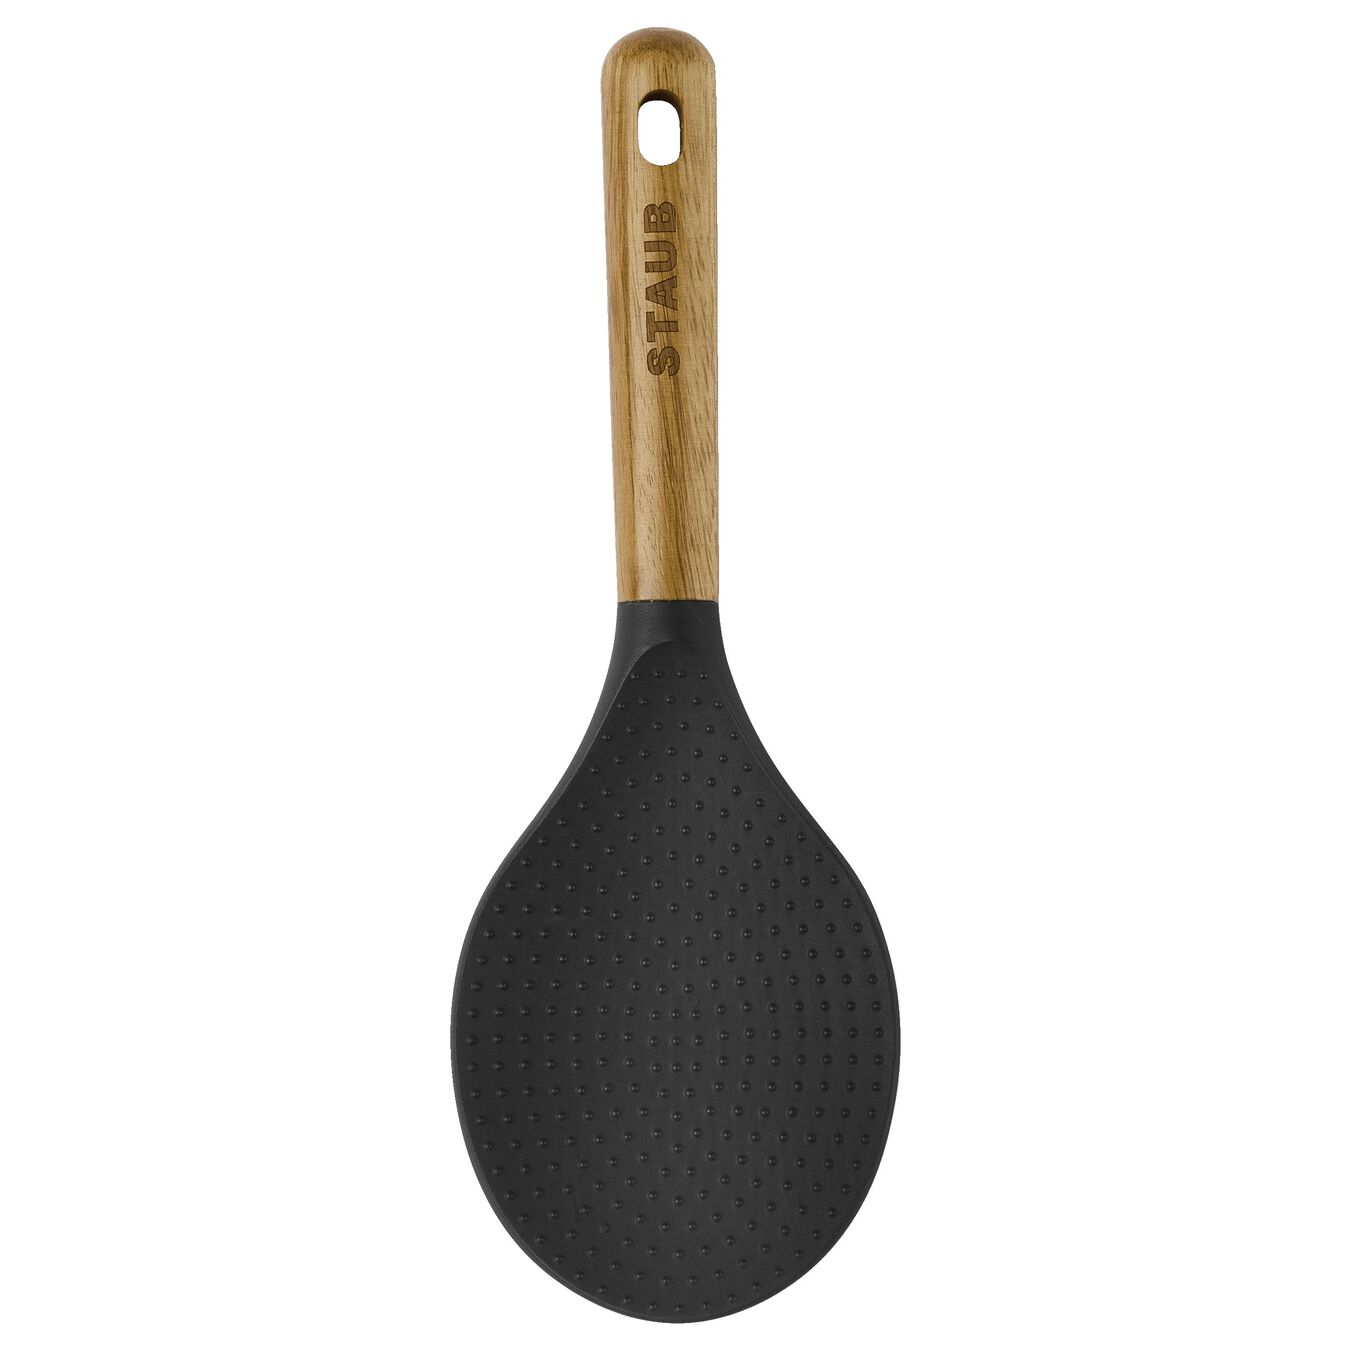 22 cm silicone Rice spoon, black,,large 2